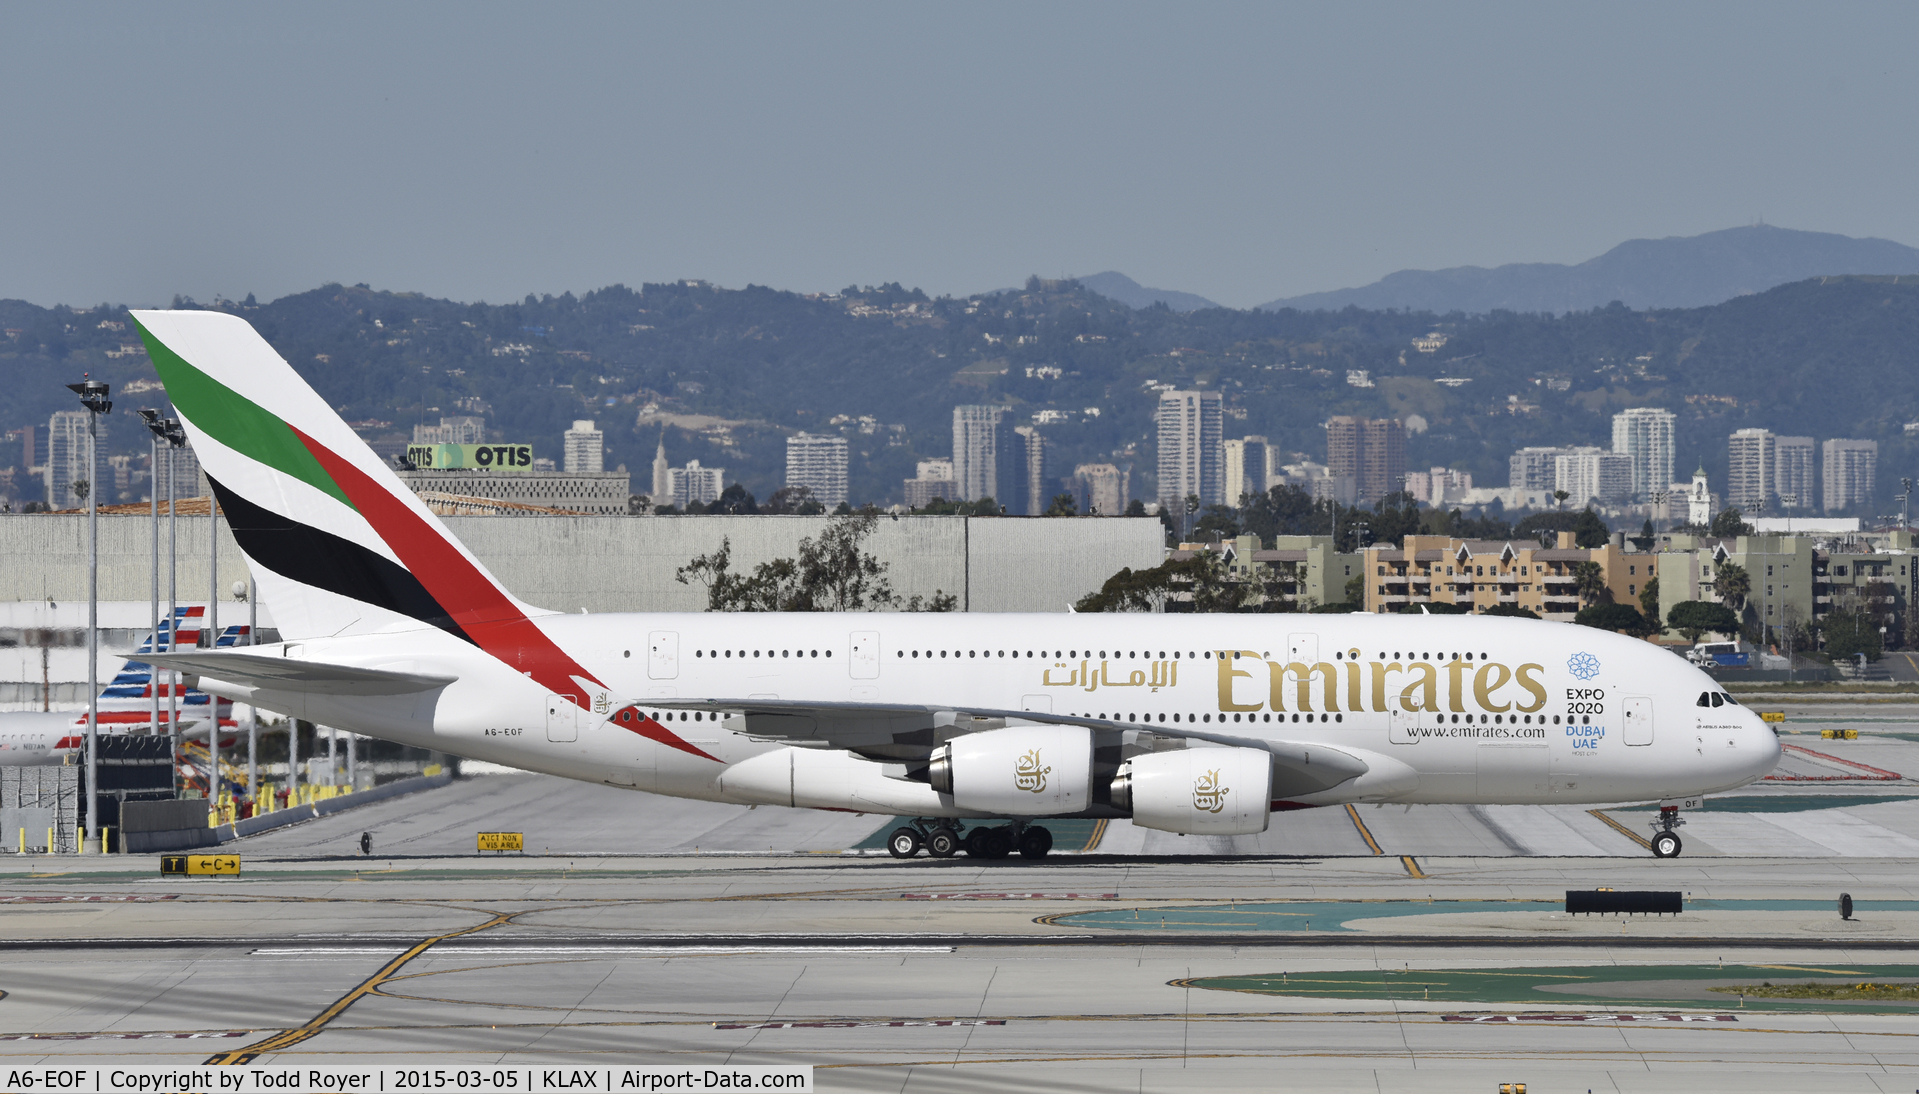 A6-EOF, 2014 Airbus A380-861 C/N 171, Taxiing to gate at LAX